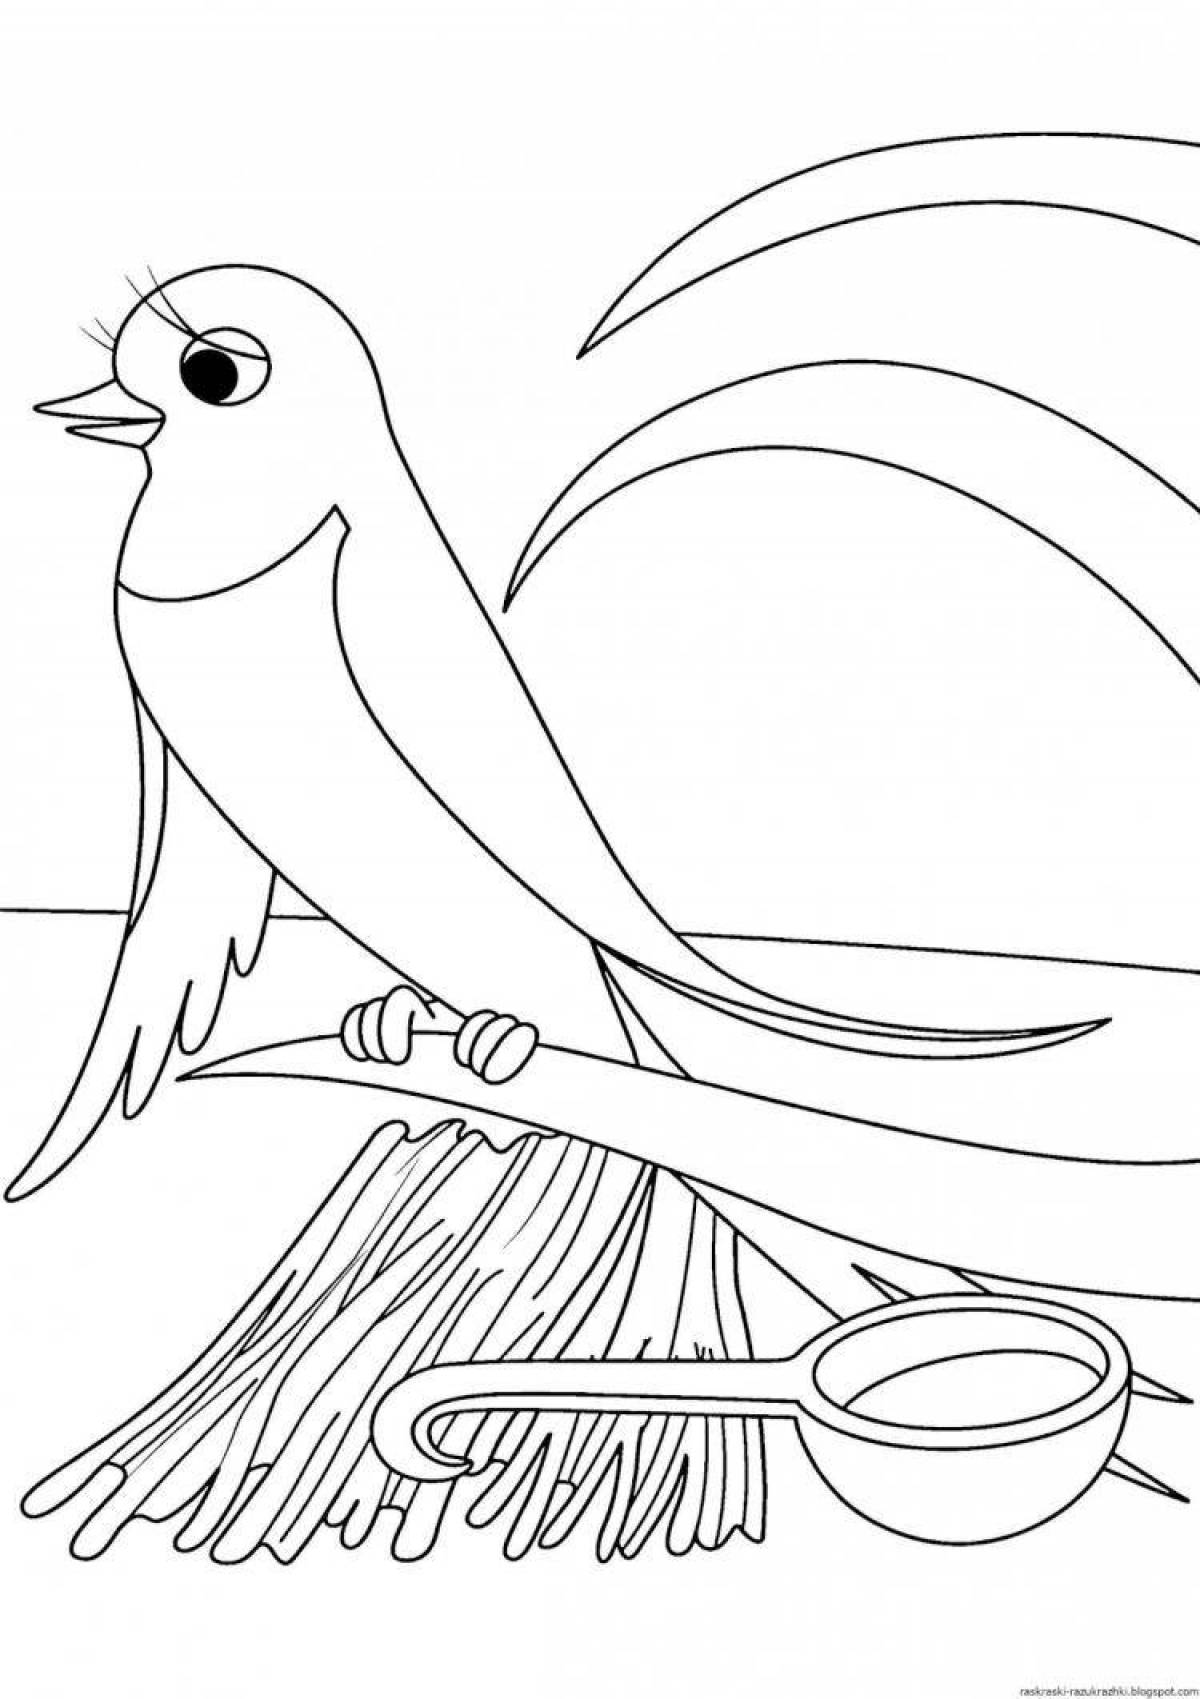 Colorful swallow coloring book for kids